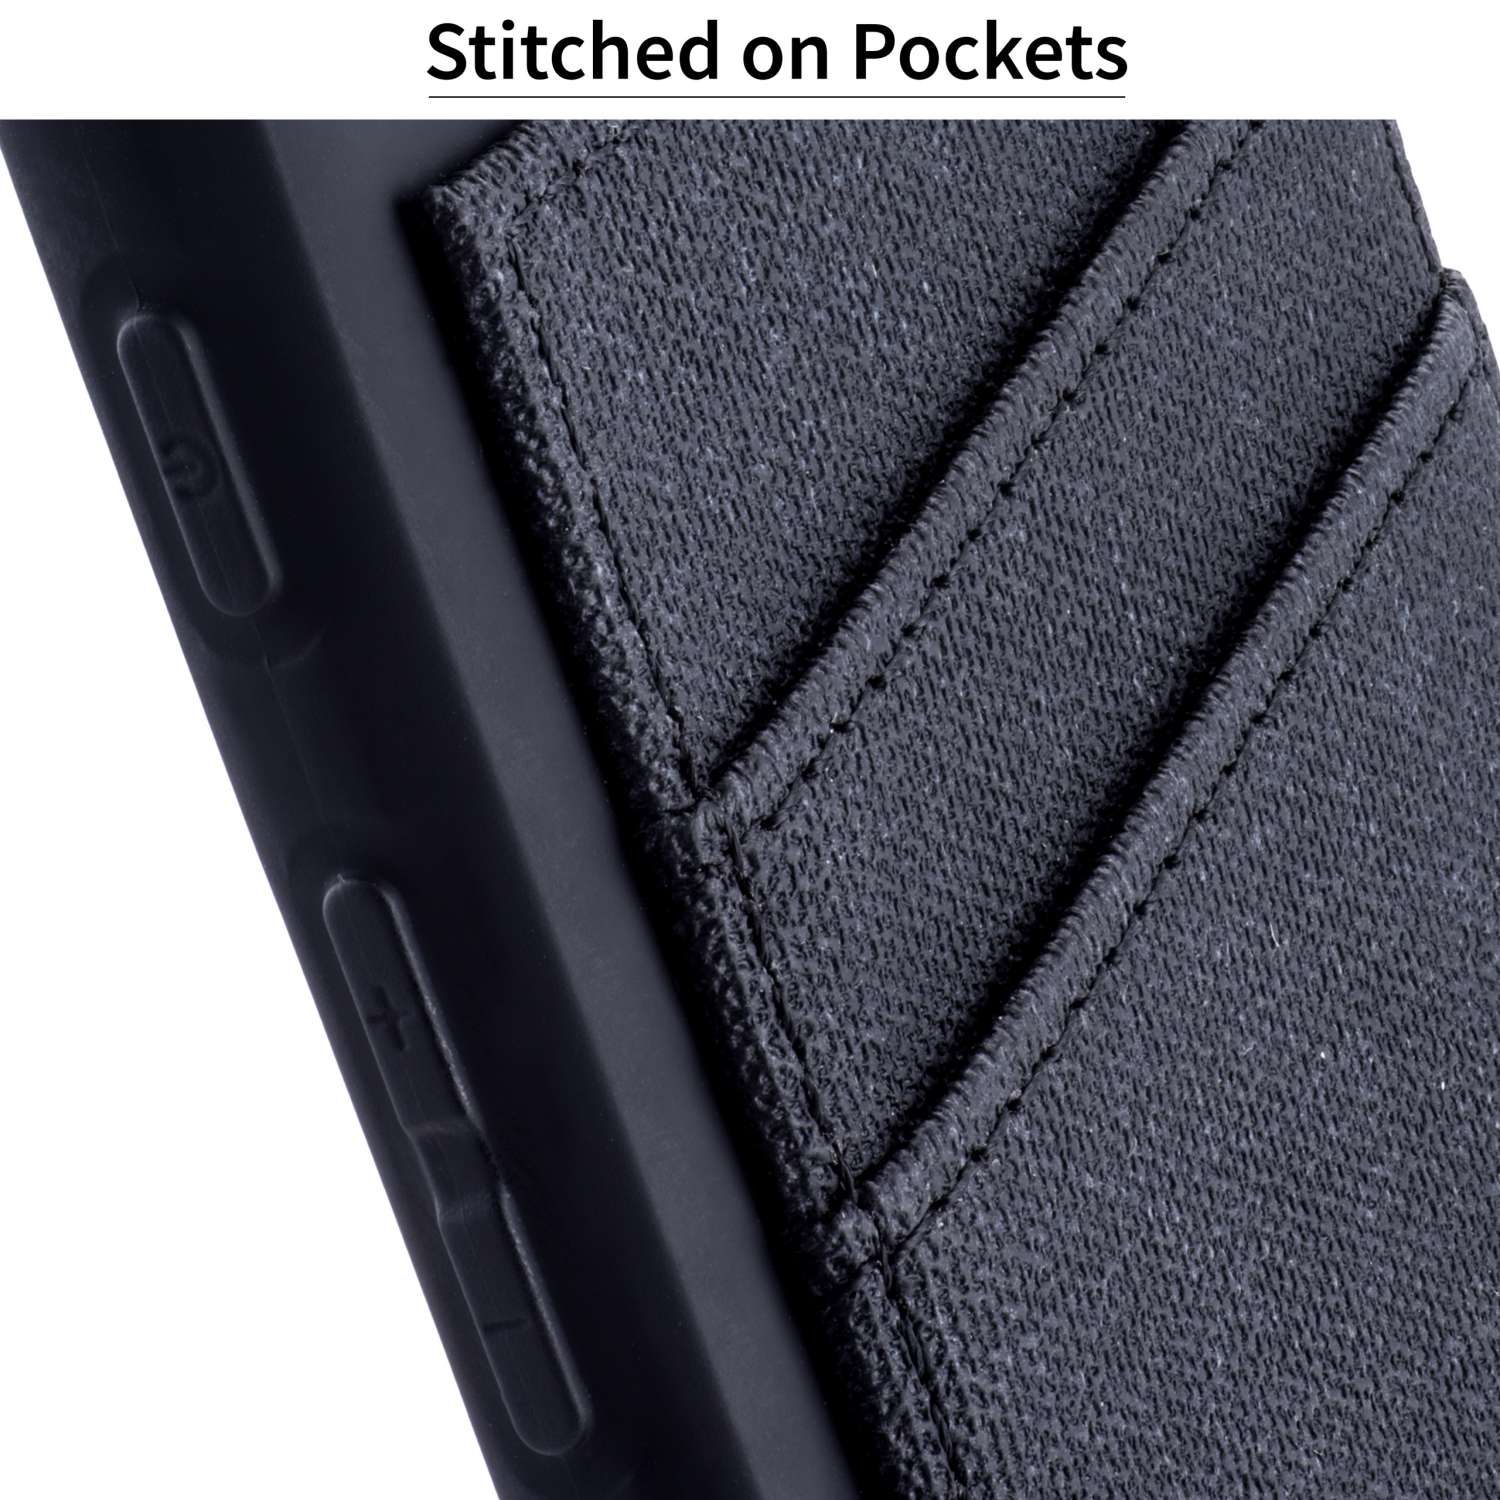 Power Support Leather Folio Case for Pixel 7a - Google Store